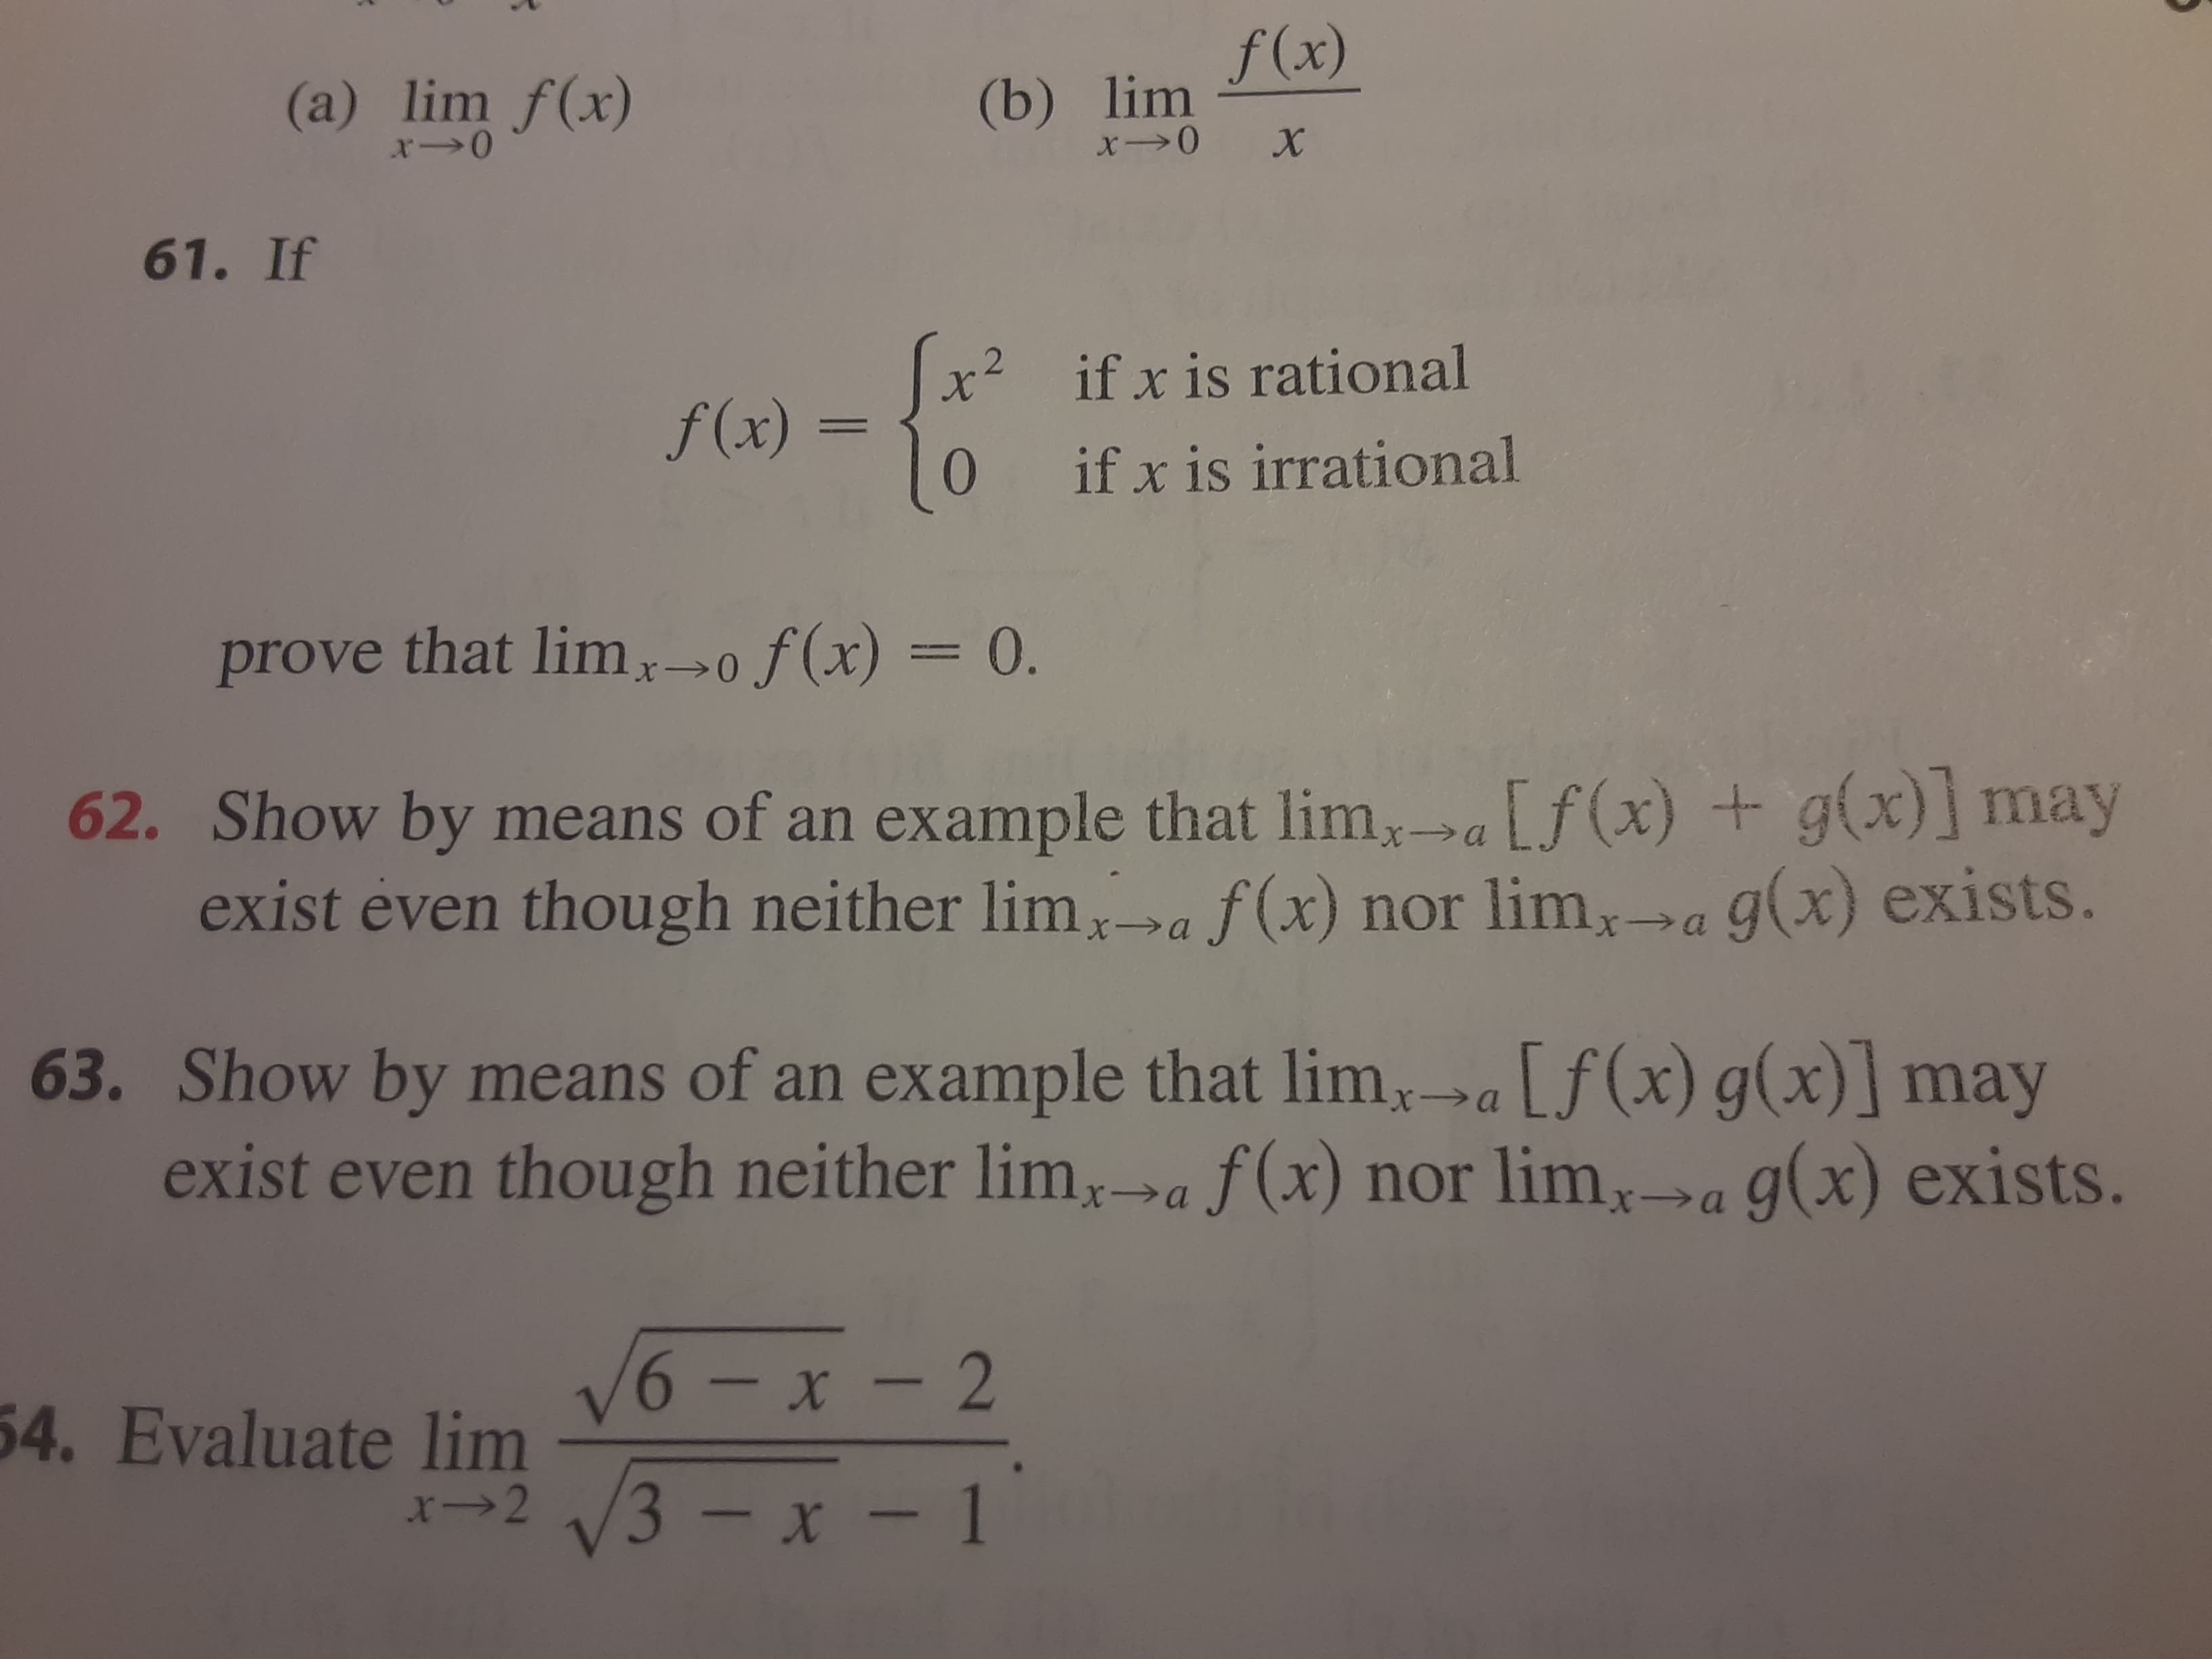 Show by means of an example that lim,aLf(x) + g(x)] may
exist even though neither lim,,a f(x) nor lim,-a g(x) exists.
